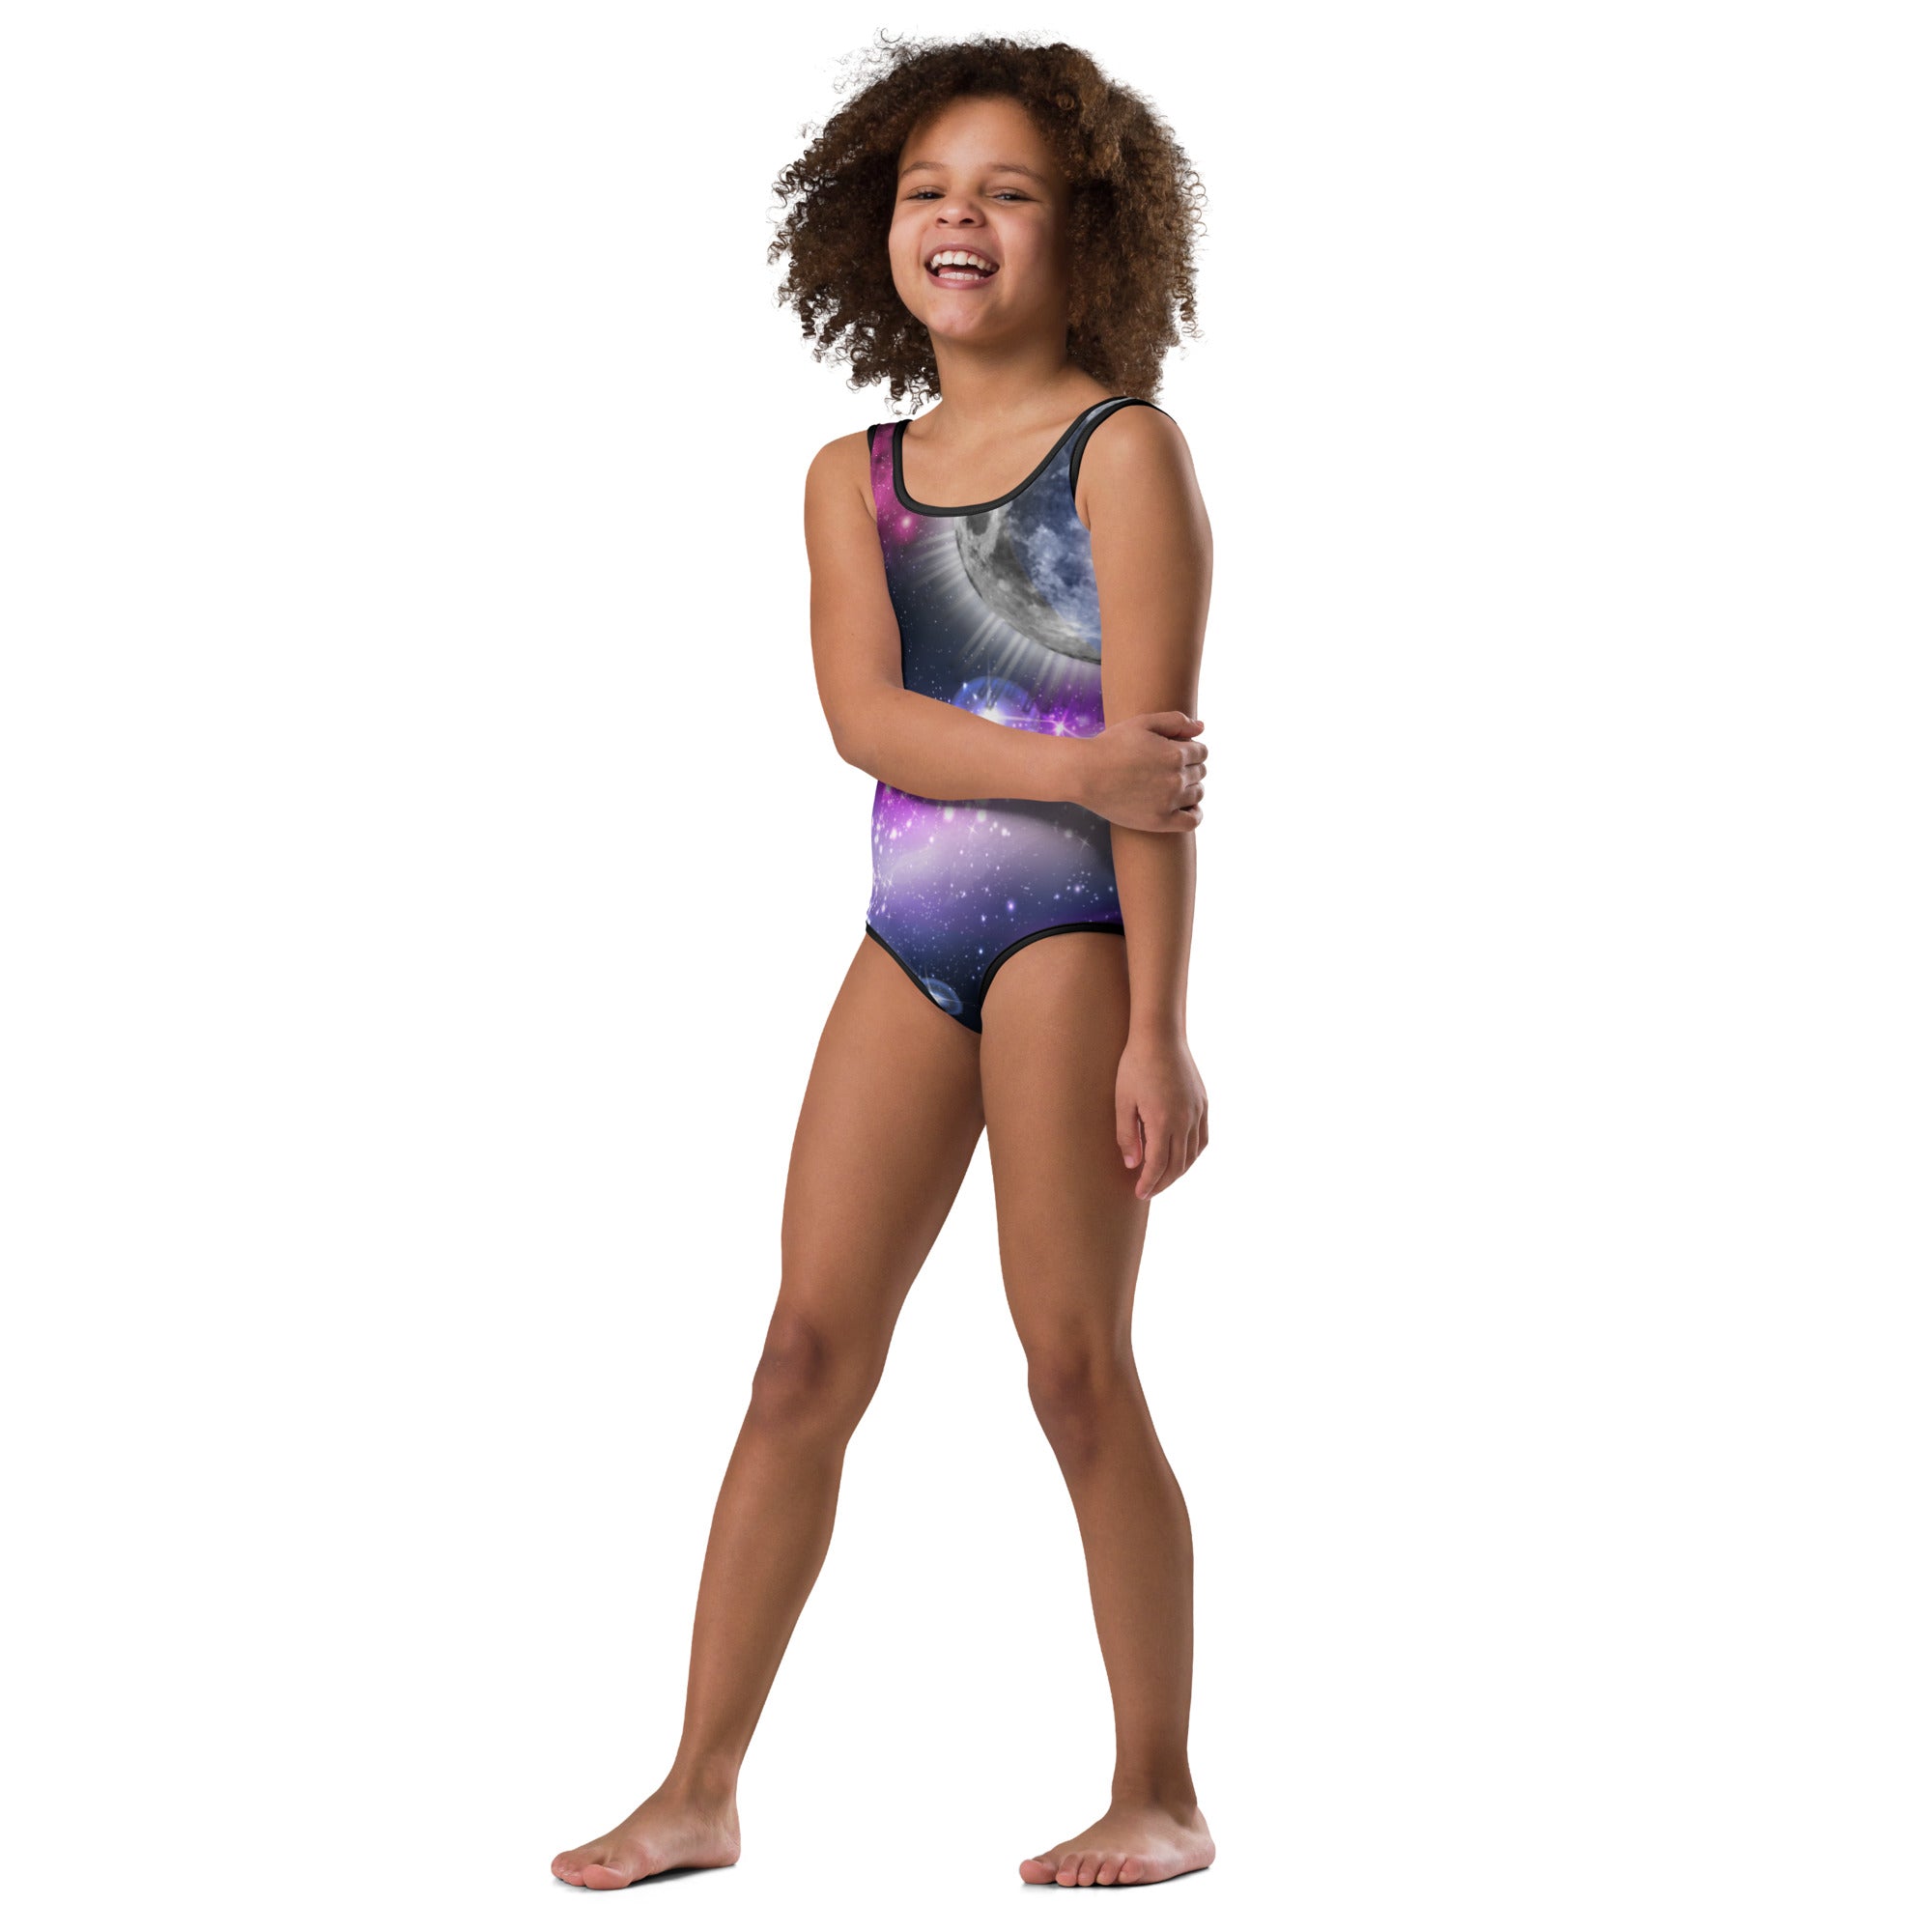 To The Moon Child Swimsuit